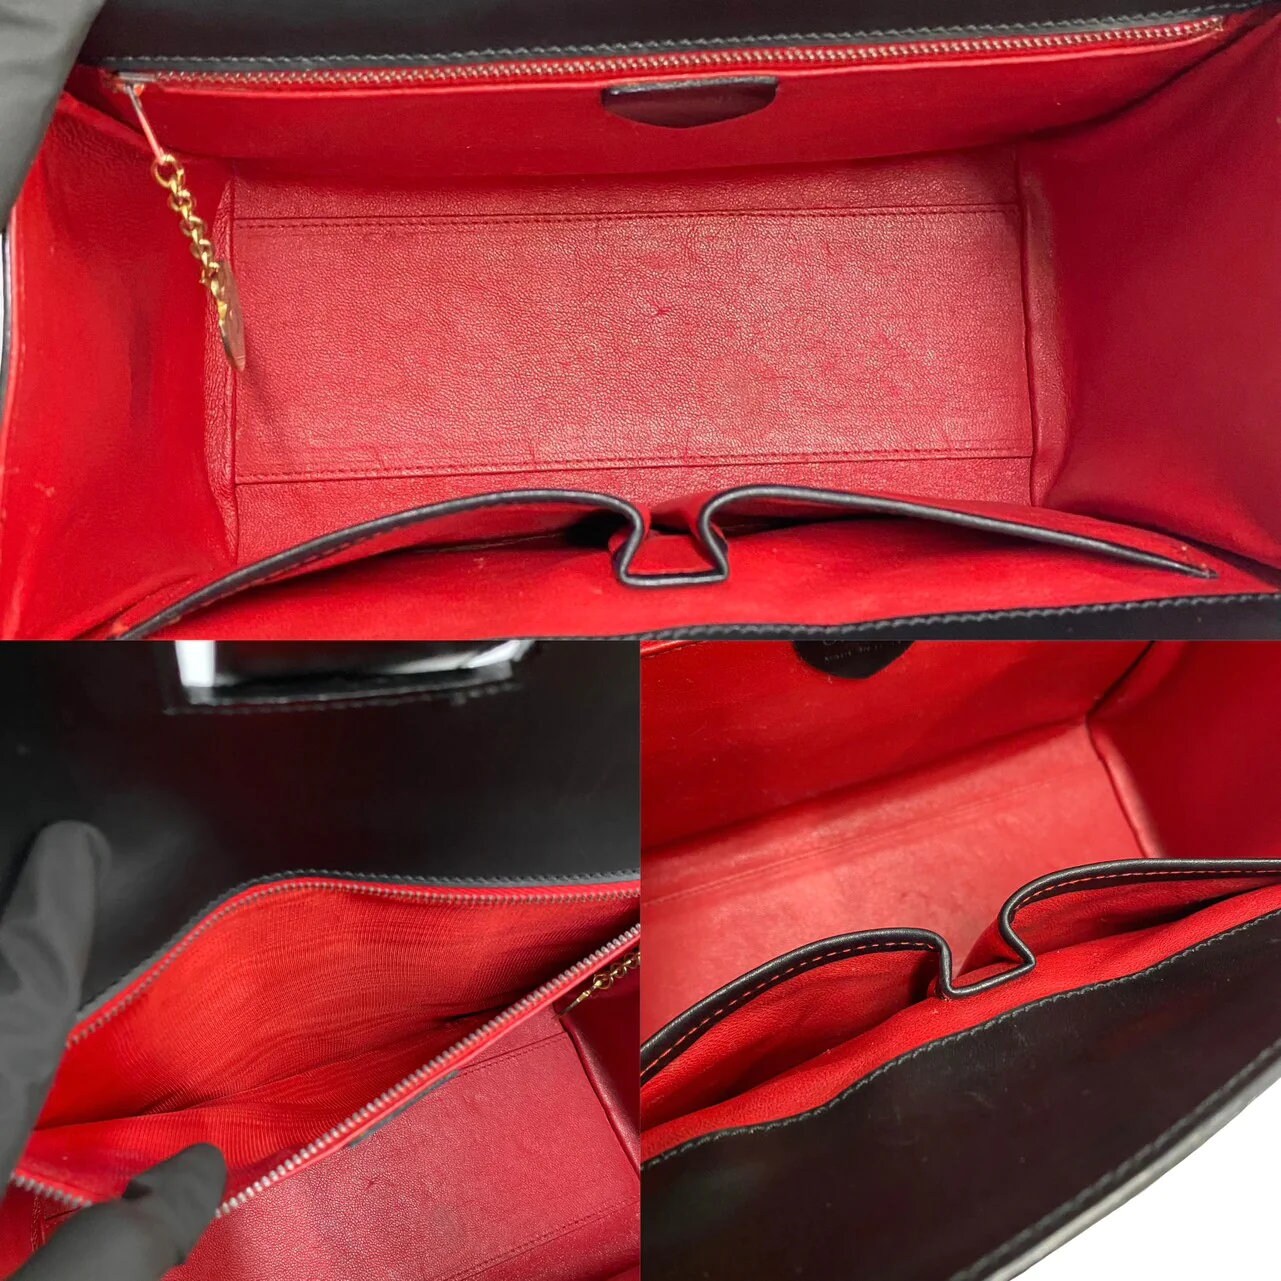 CELINE VINTAGE 100% Authentic Genuine, Vanity Case Style Handbag, Black with Contrast Red Leather Inner Lining, Late 1990's, Great Condition